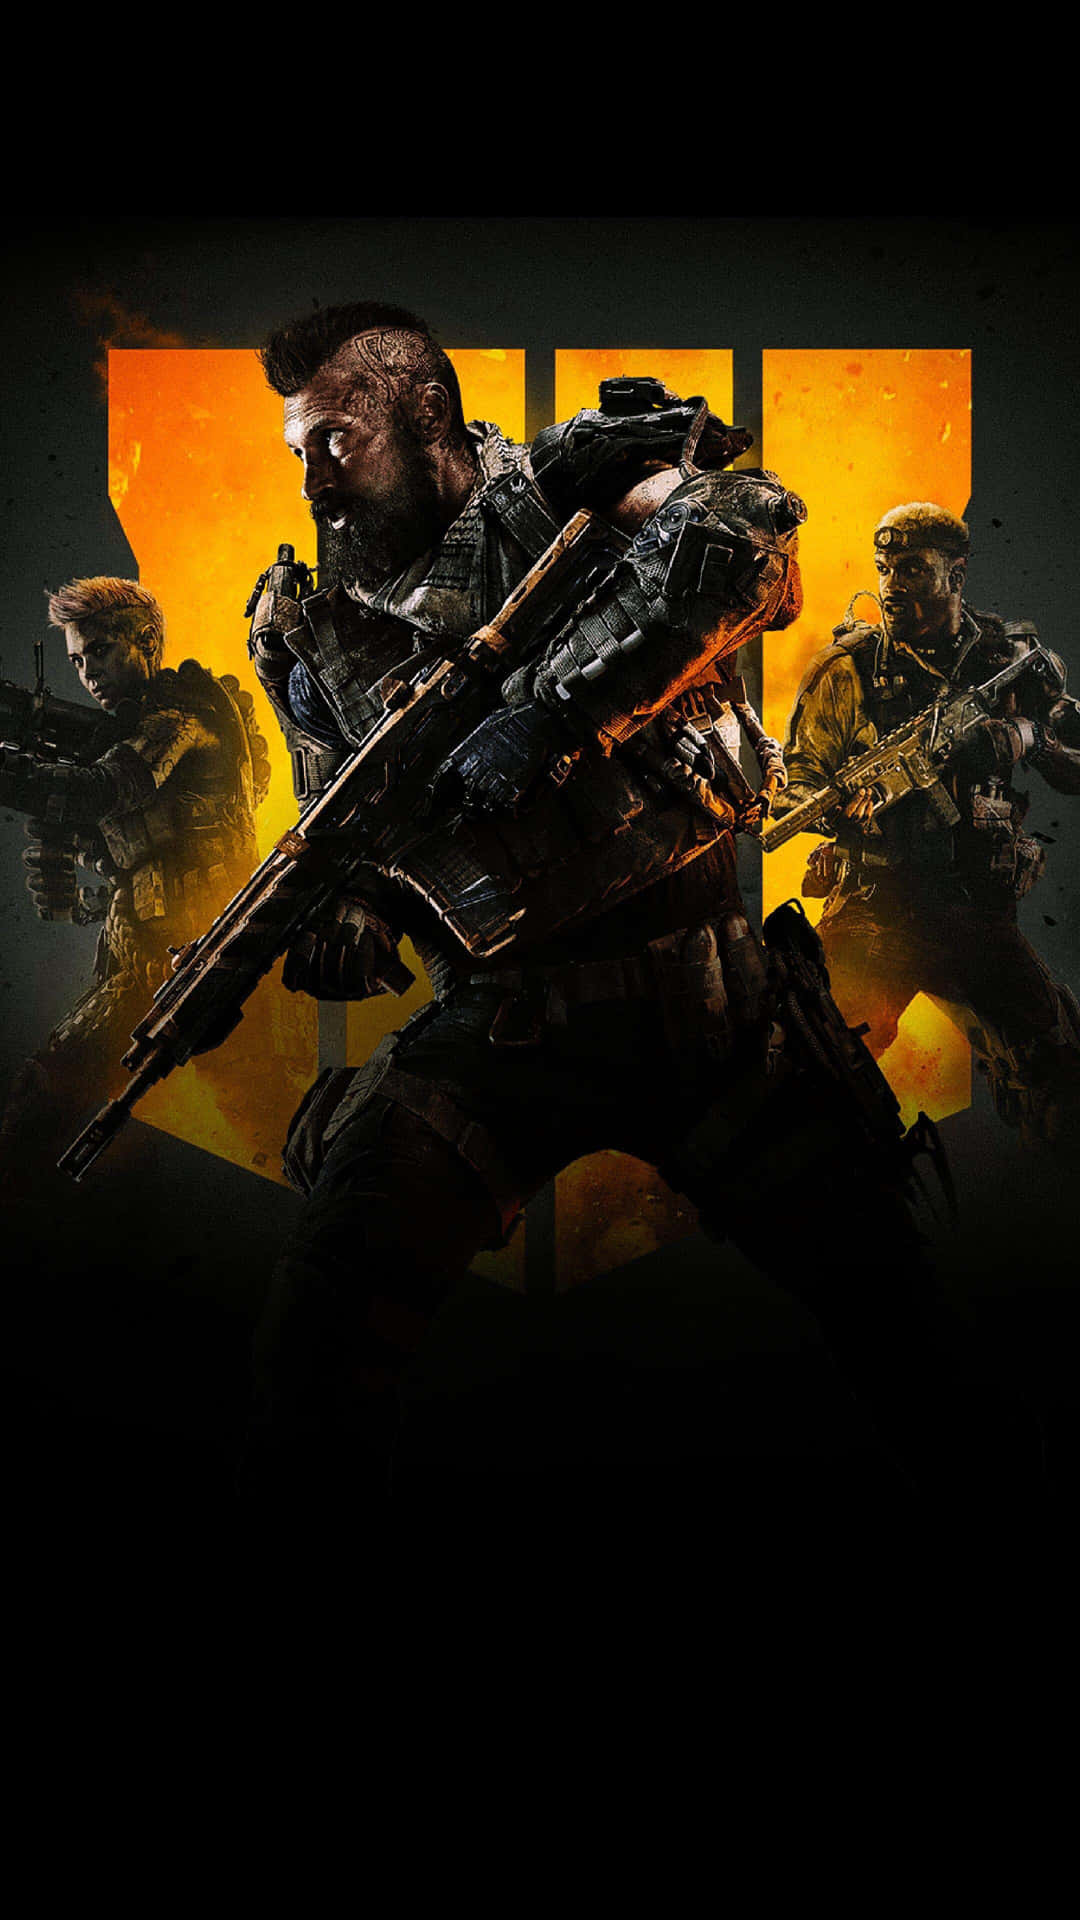 Explore the battlefield in Call of Duty: Black Ops 4 Wallpaper